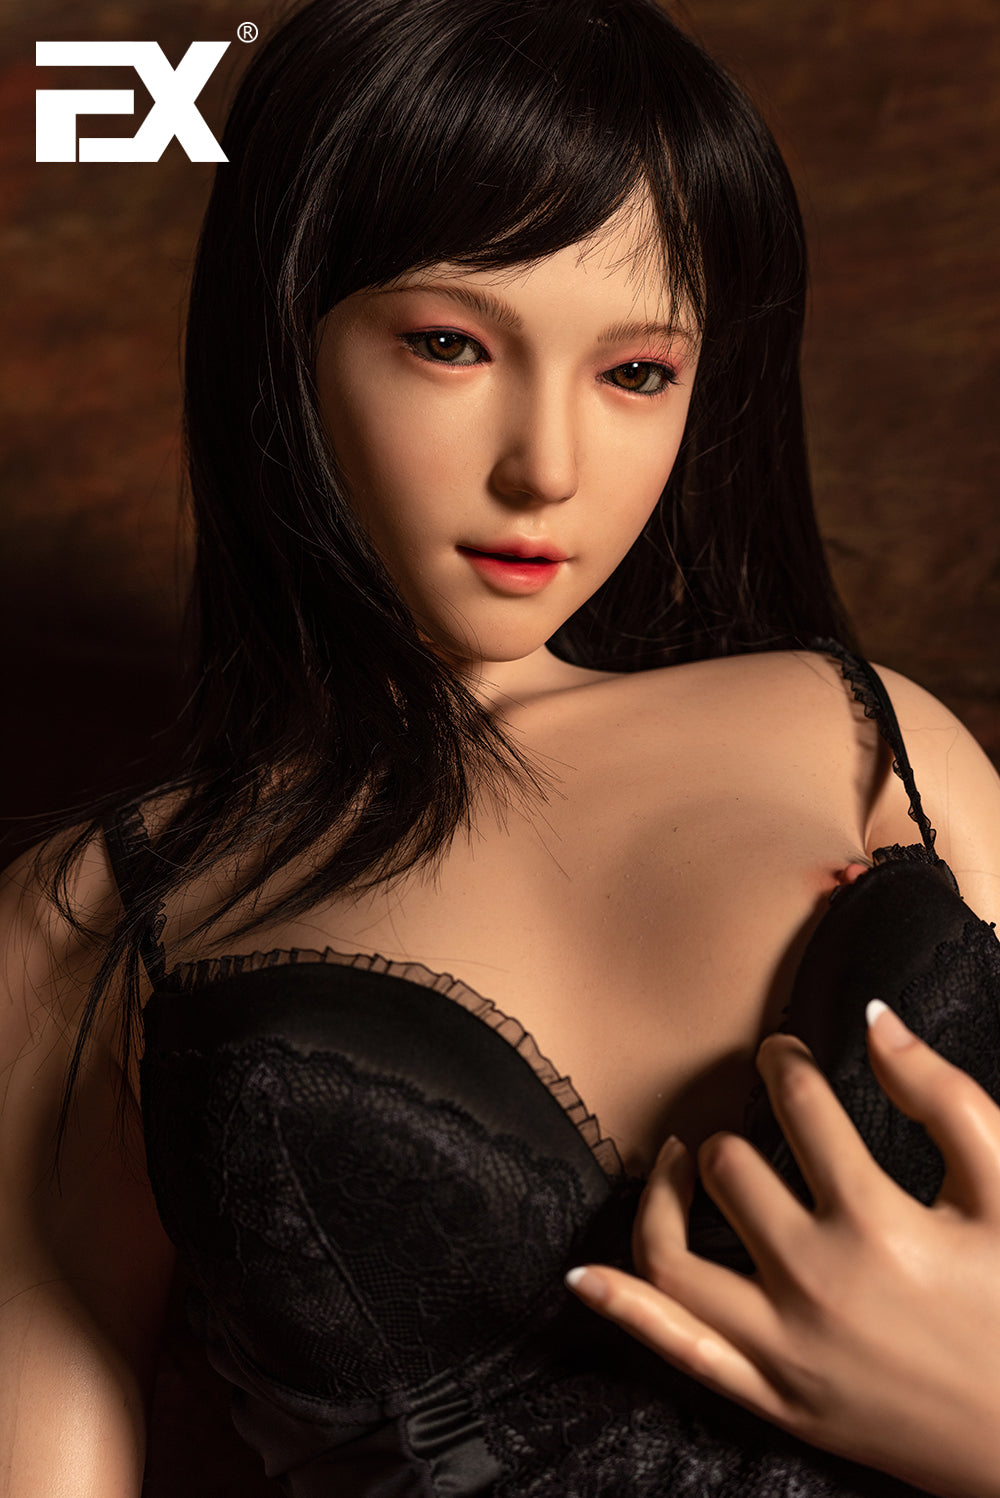 EX Doll Summit Series 152 cm Silicone - Jodie | Buy Sex Dolls at DOLLS ACTUALLY